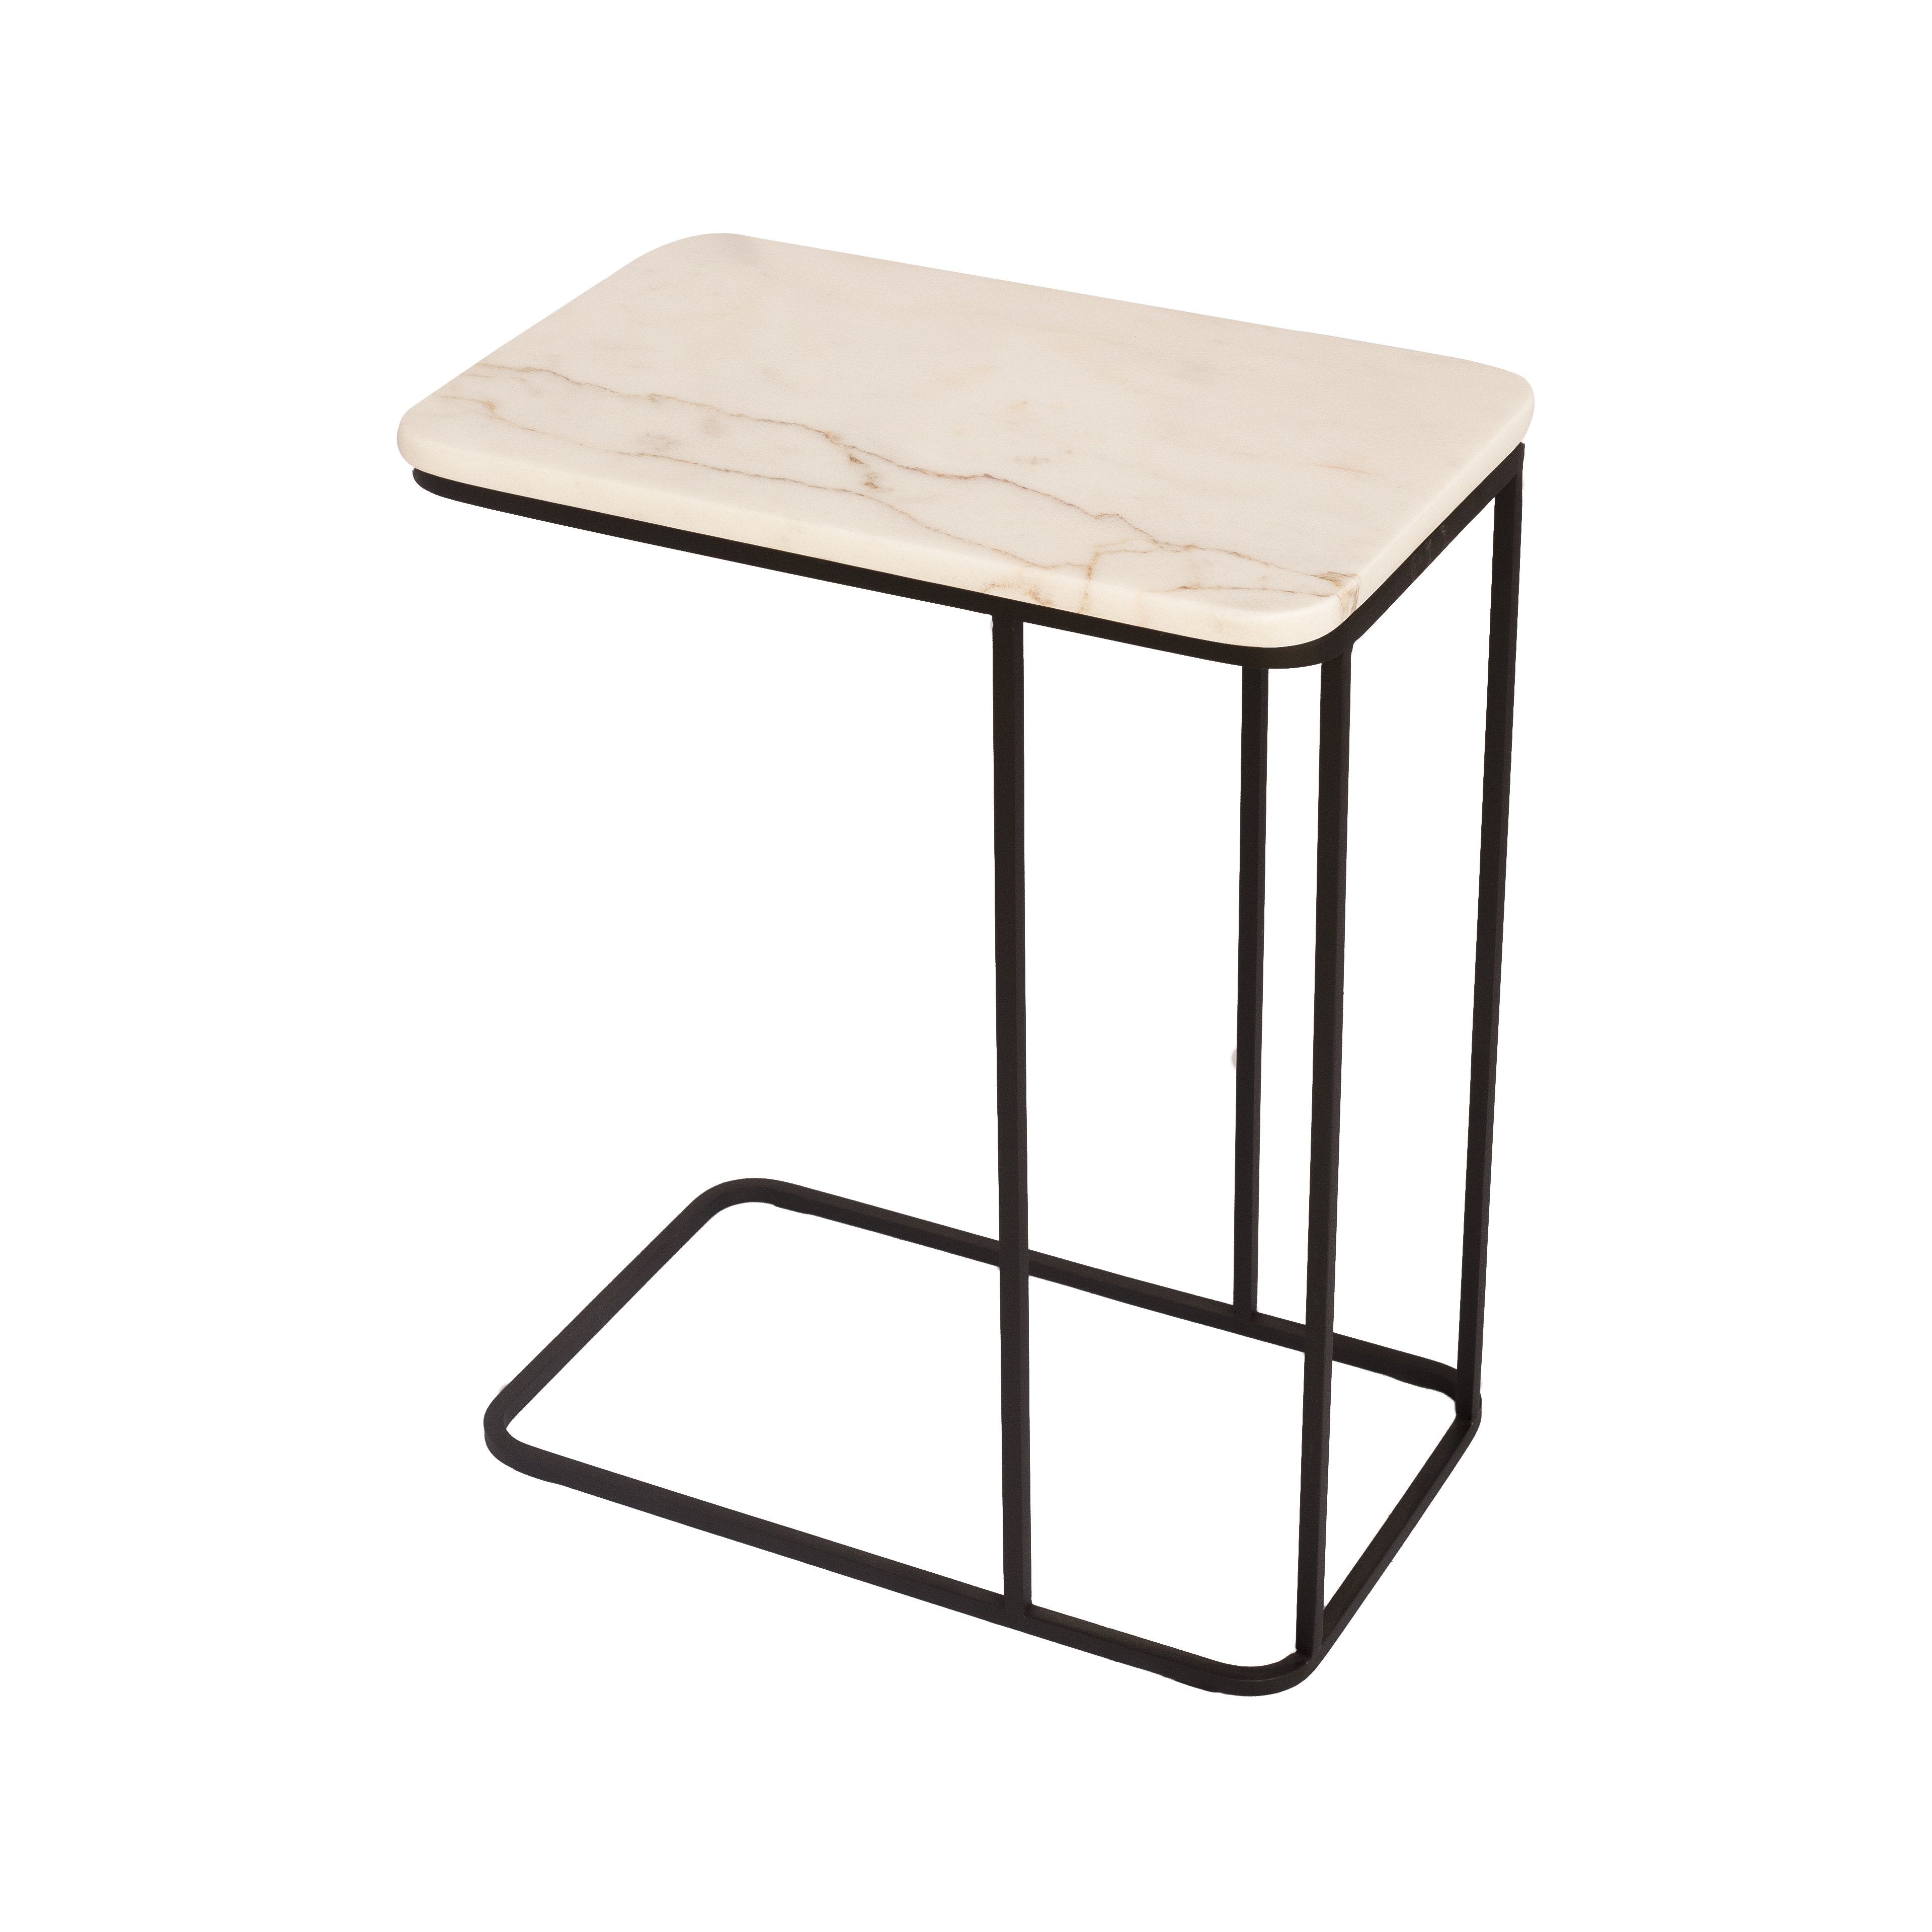 Heka Table - ARGON- The Mob Collective